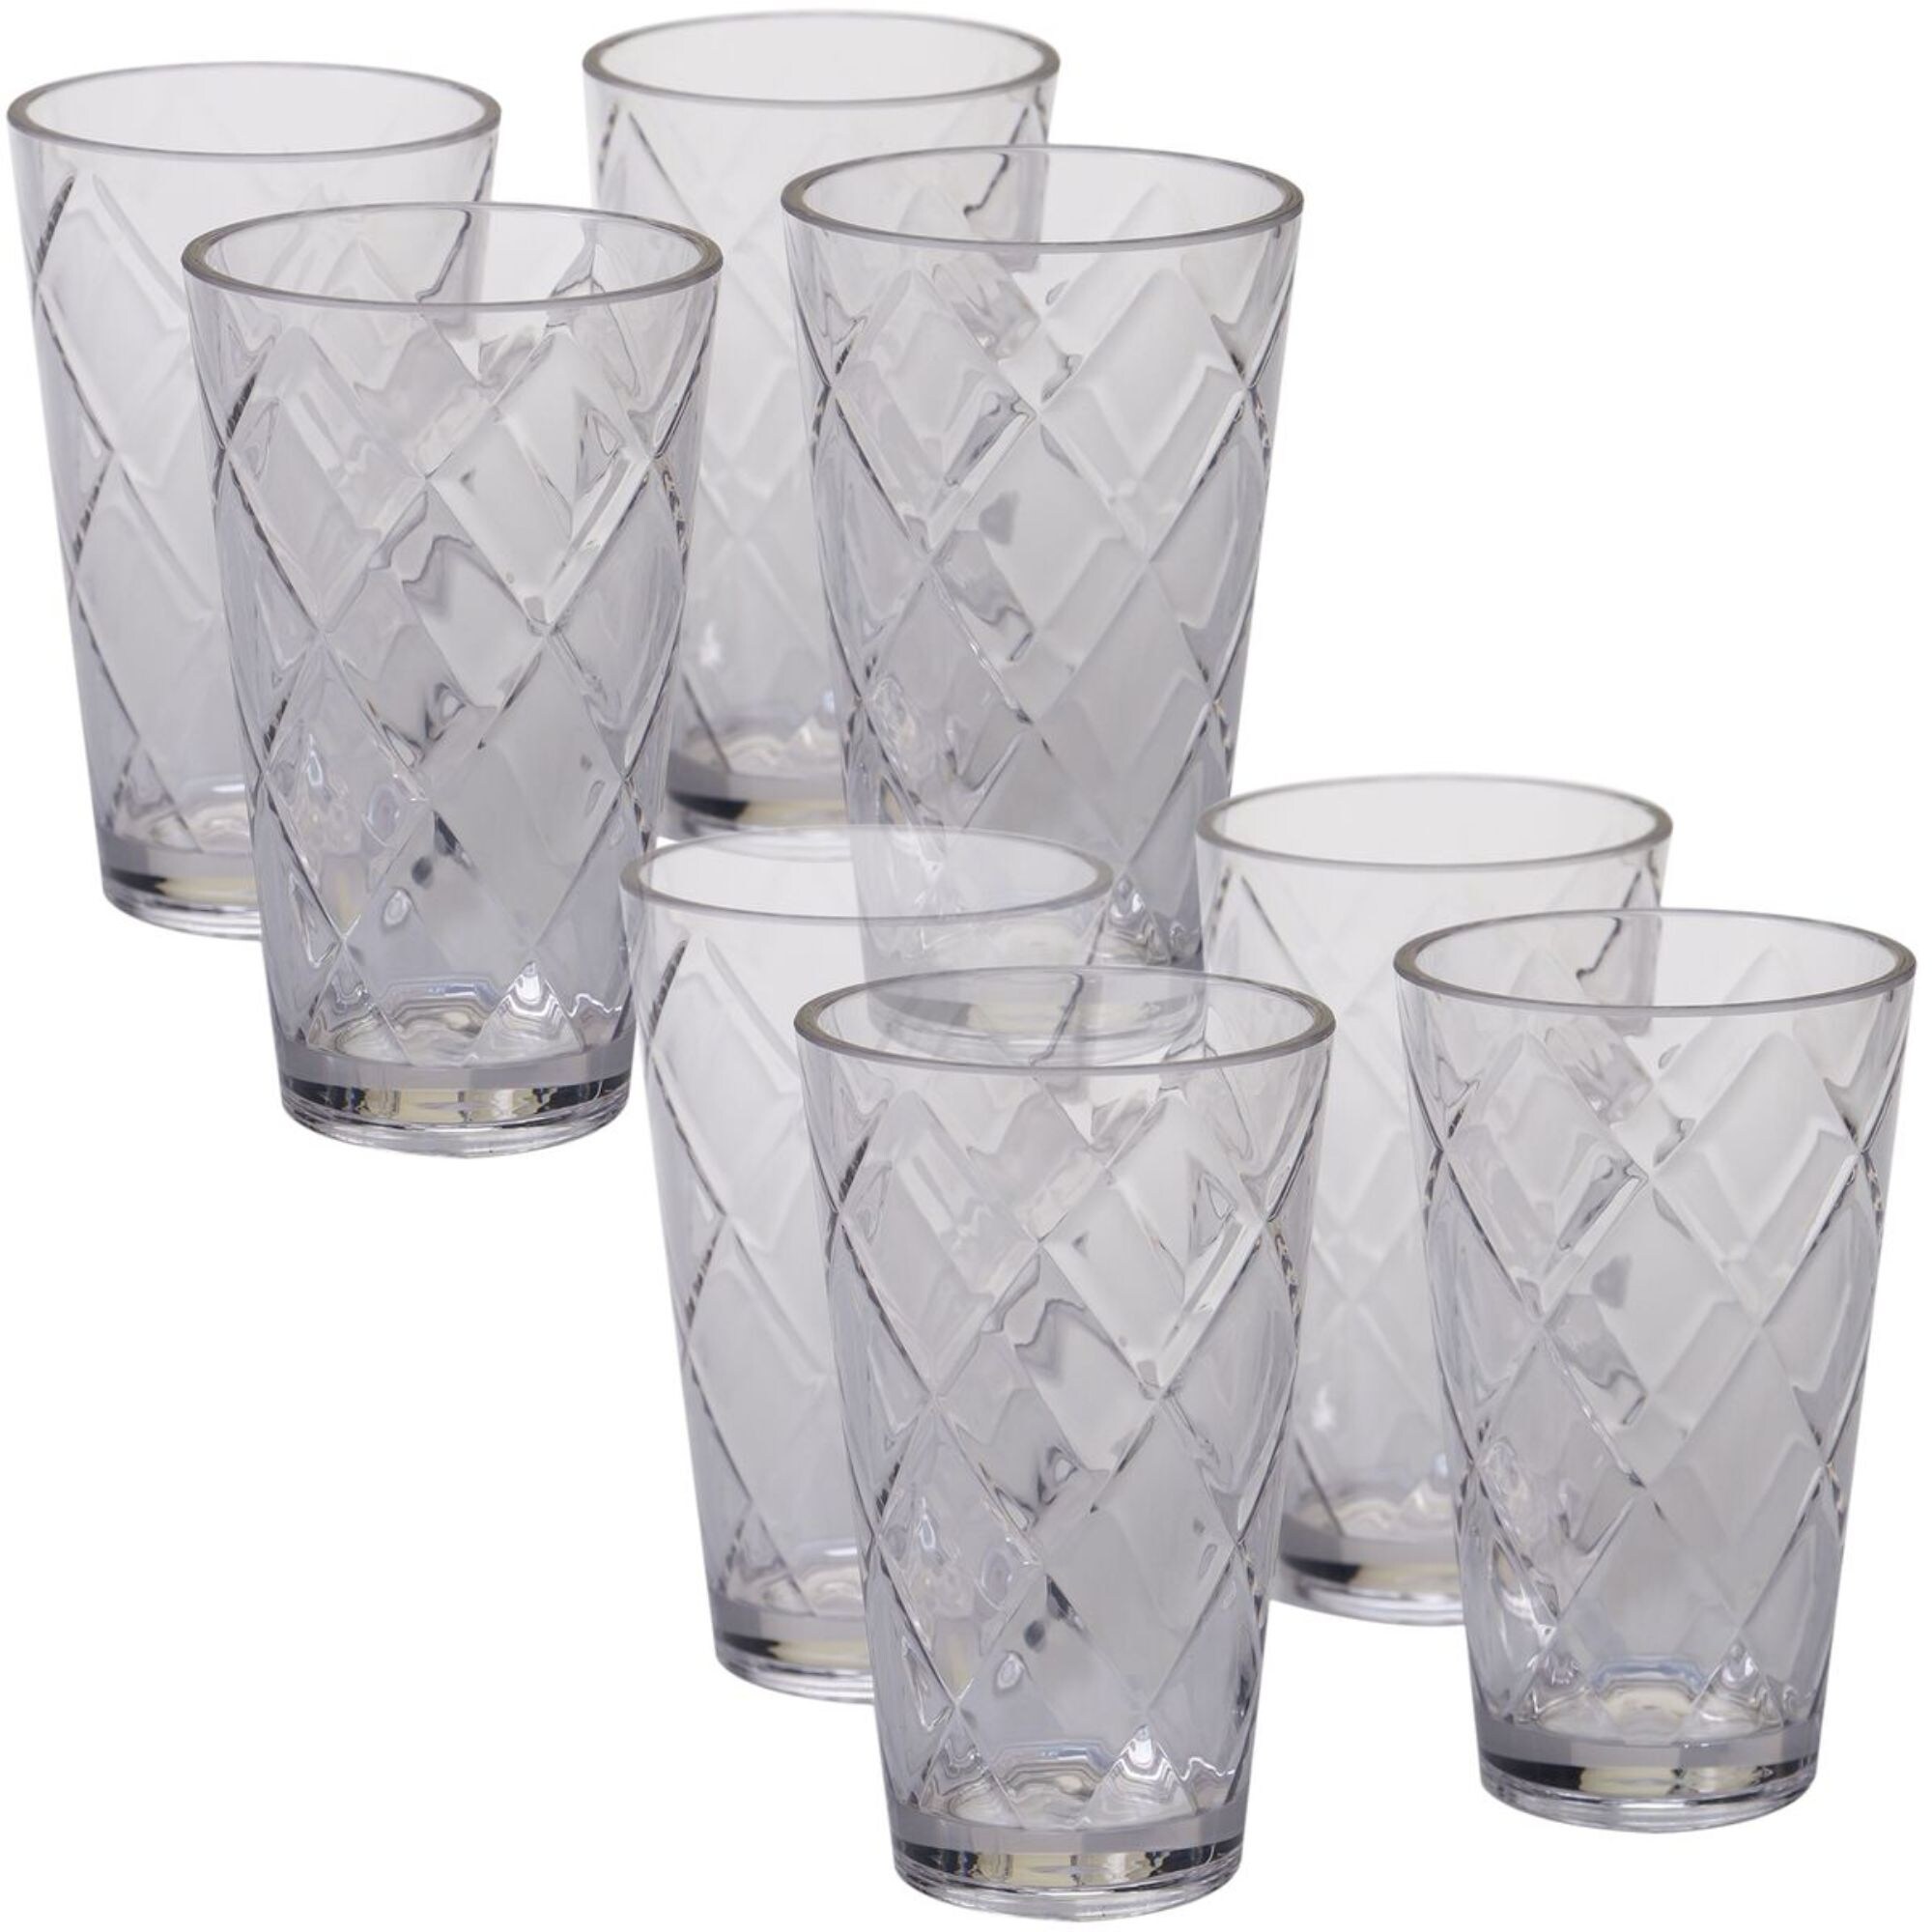 https://ak1.ostkcdn.com/images/products/is/images/direct/a56580842213bb01ec034031b16a4797fcd8ab6c/8pc-Clear-Contemporary-Glass-Ice-Tea-Cup-Set-20-oz..jpg